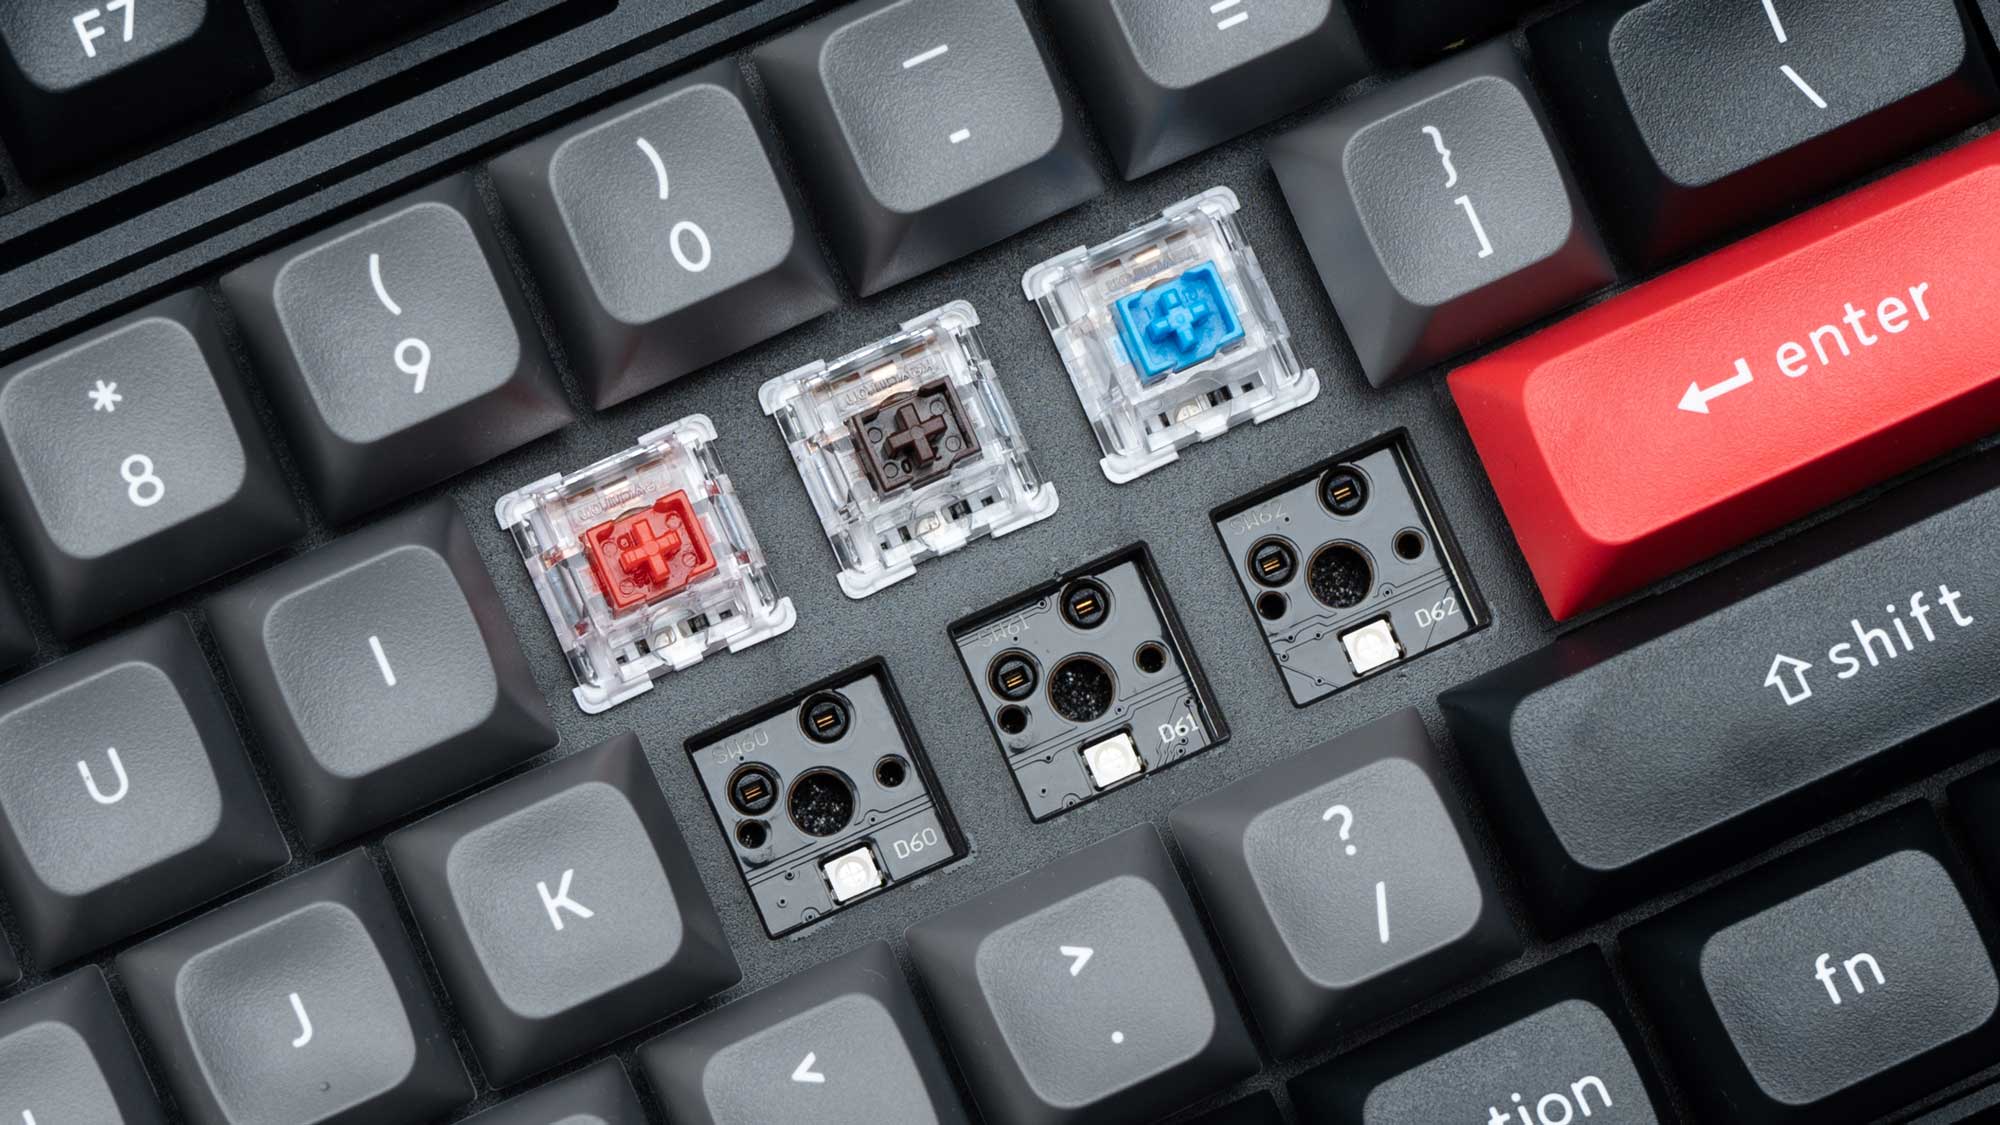 Hot-swappable feature of the Keychron Q3 Pro QMK/VIA 80% layout wireless custom mechanical keyboard